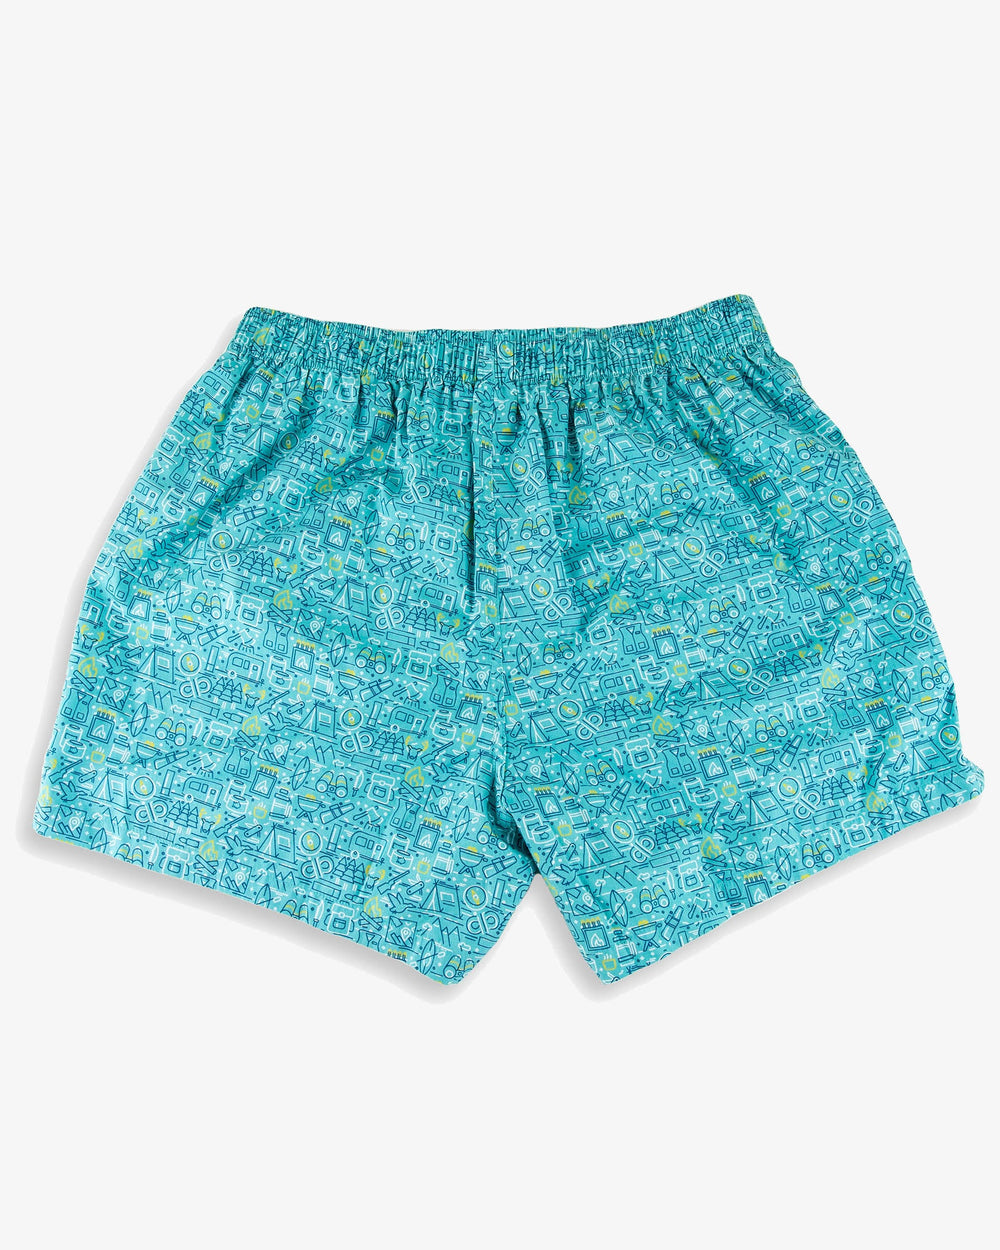 The back view of the Camping Is In-Tents Boxer by Southern Tide - Agate Green